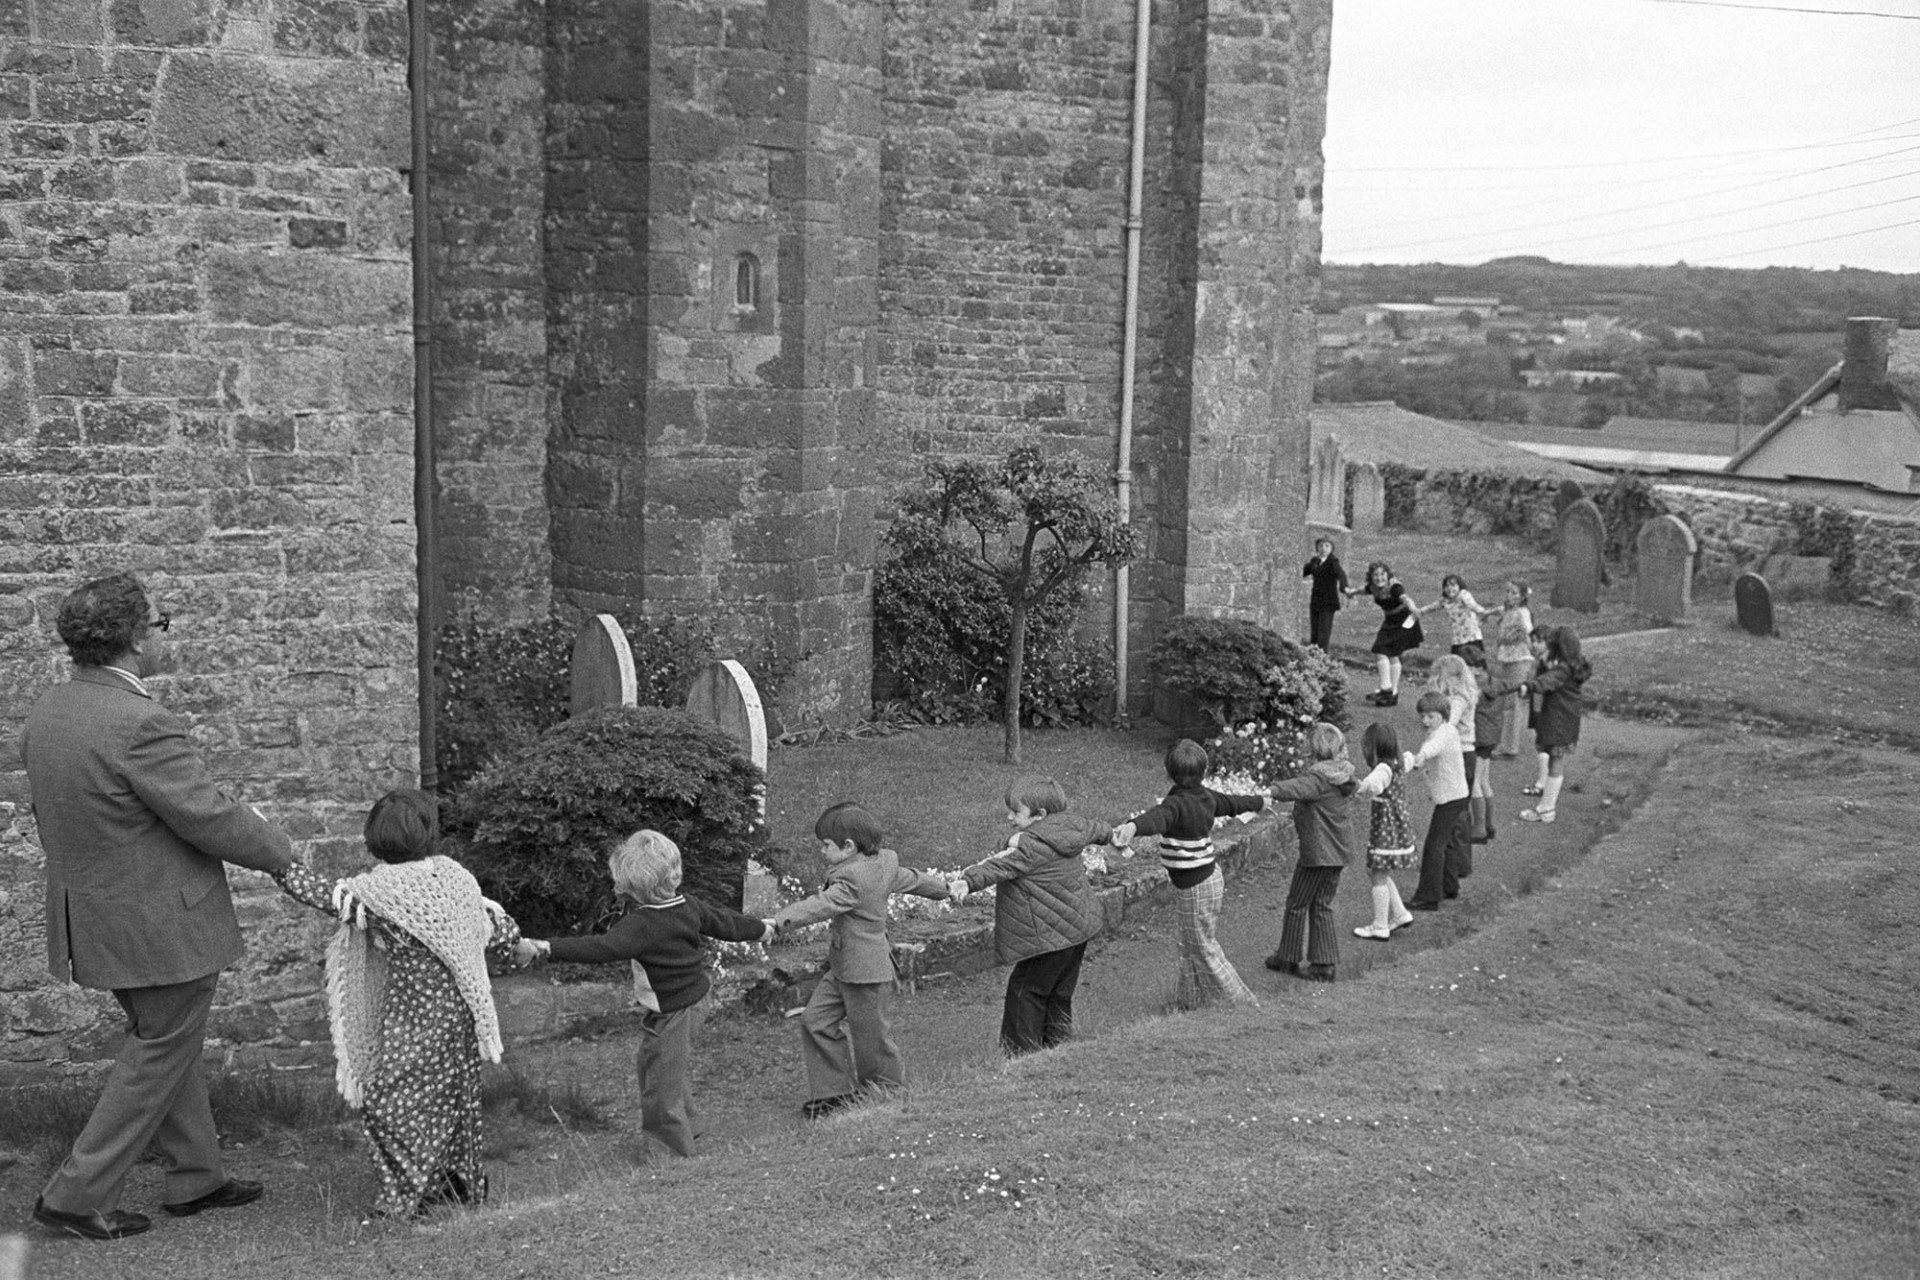 Girdling church after parade Headmaster pulling.
[Charles Tucker with children holding hands around Hatherleigh church for the Church Sunday School Parade.]